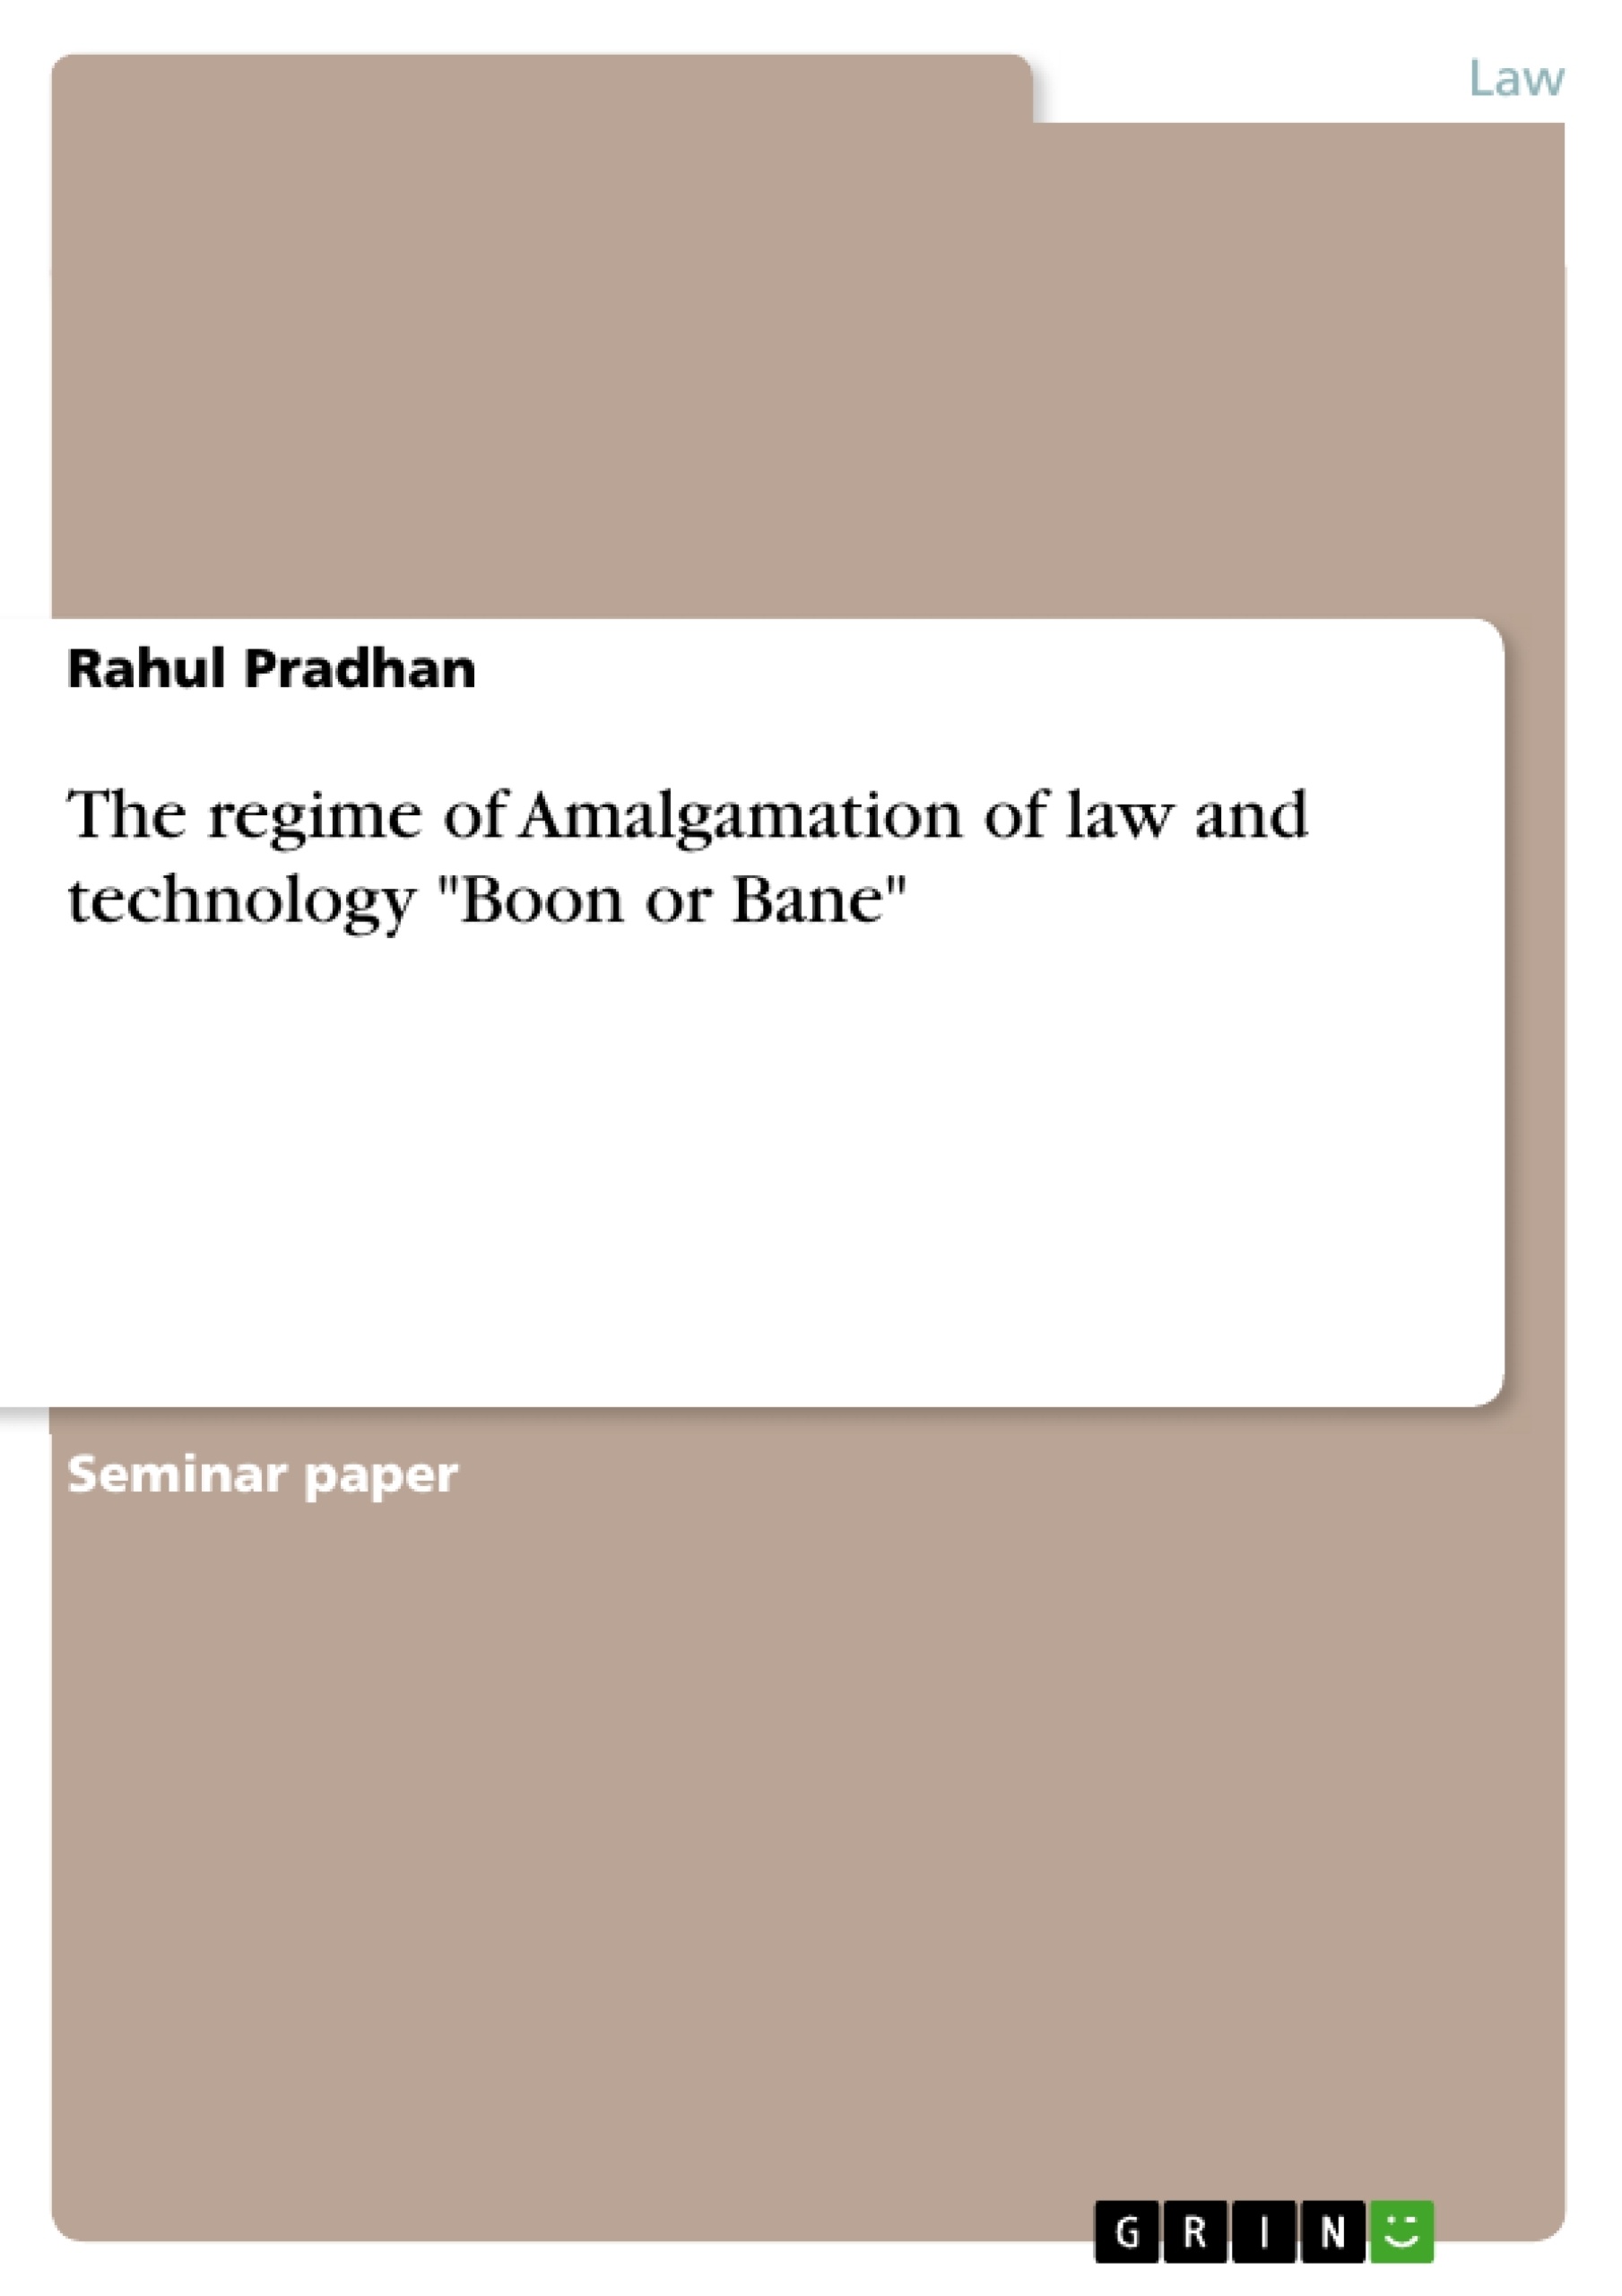 Title: The regime of Amalgamation of law and technology "Boon or Bane"